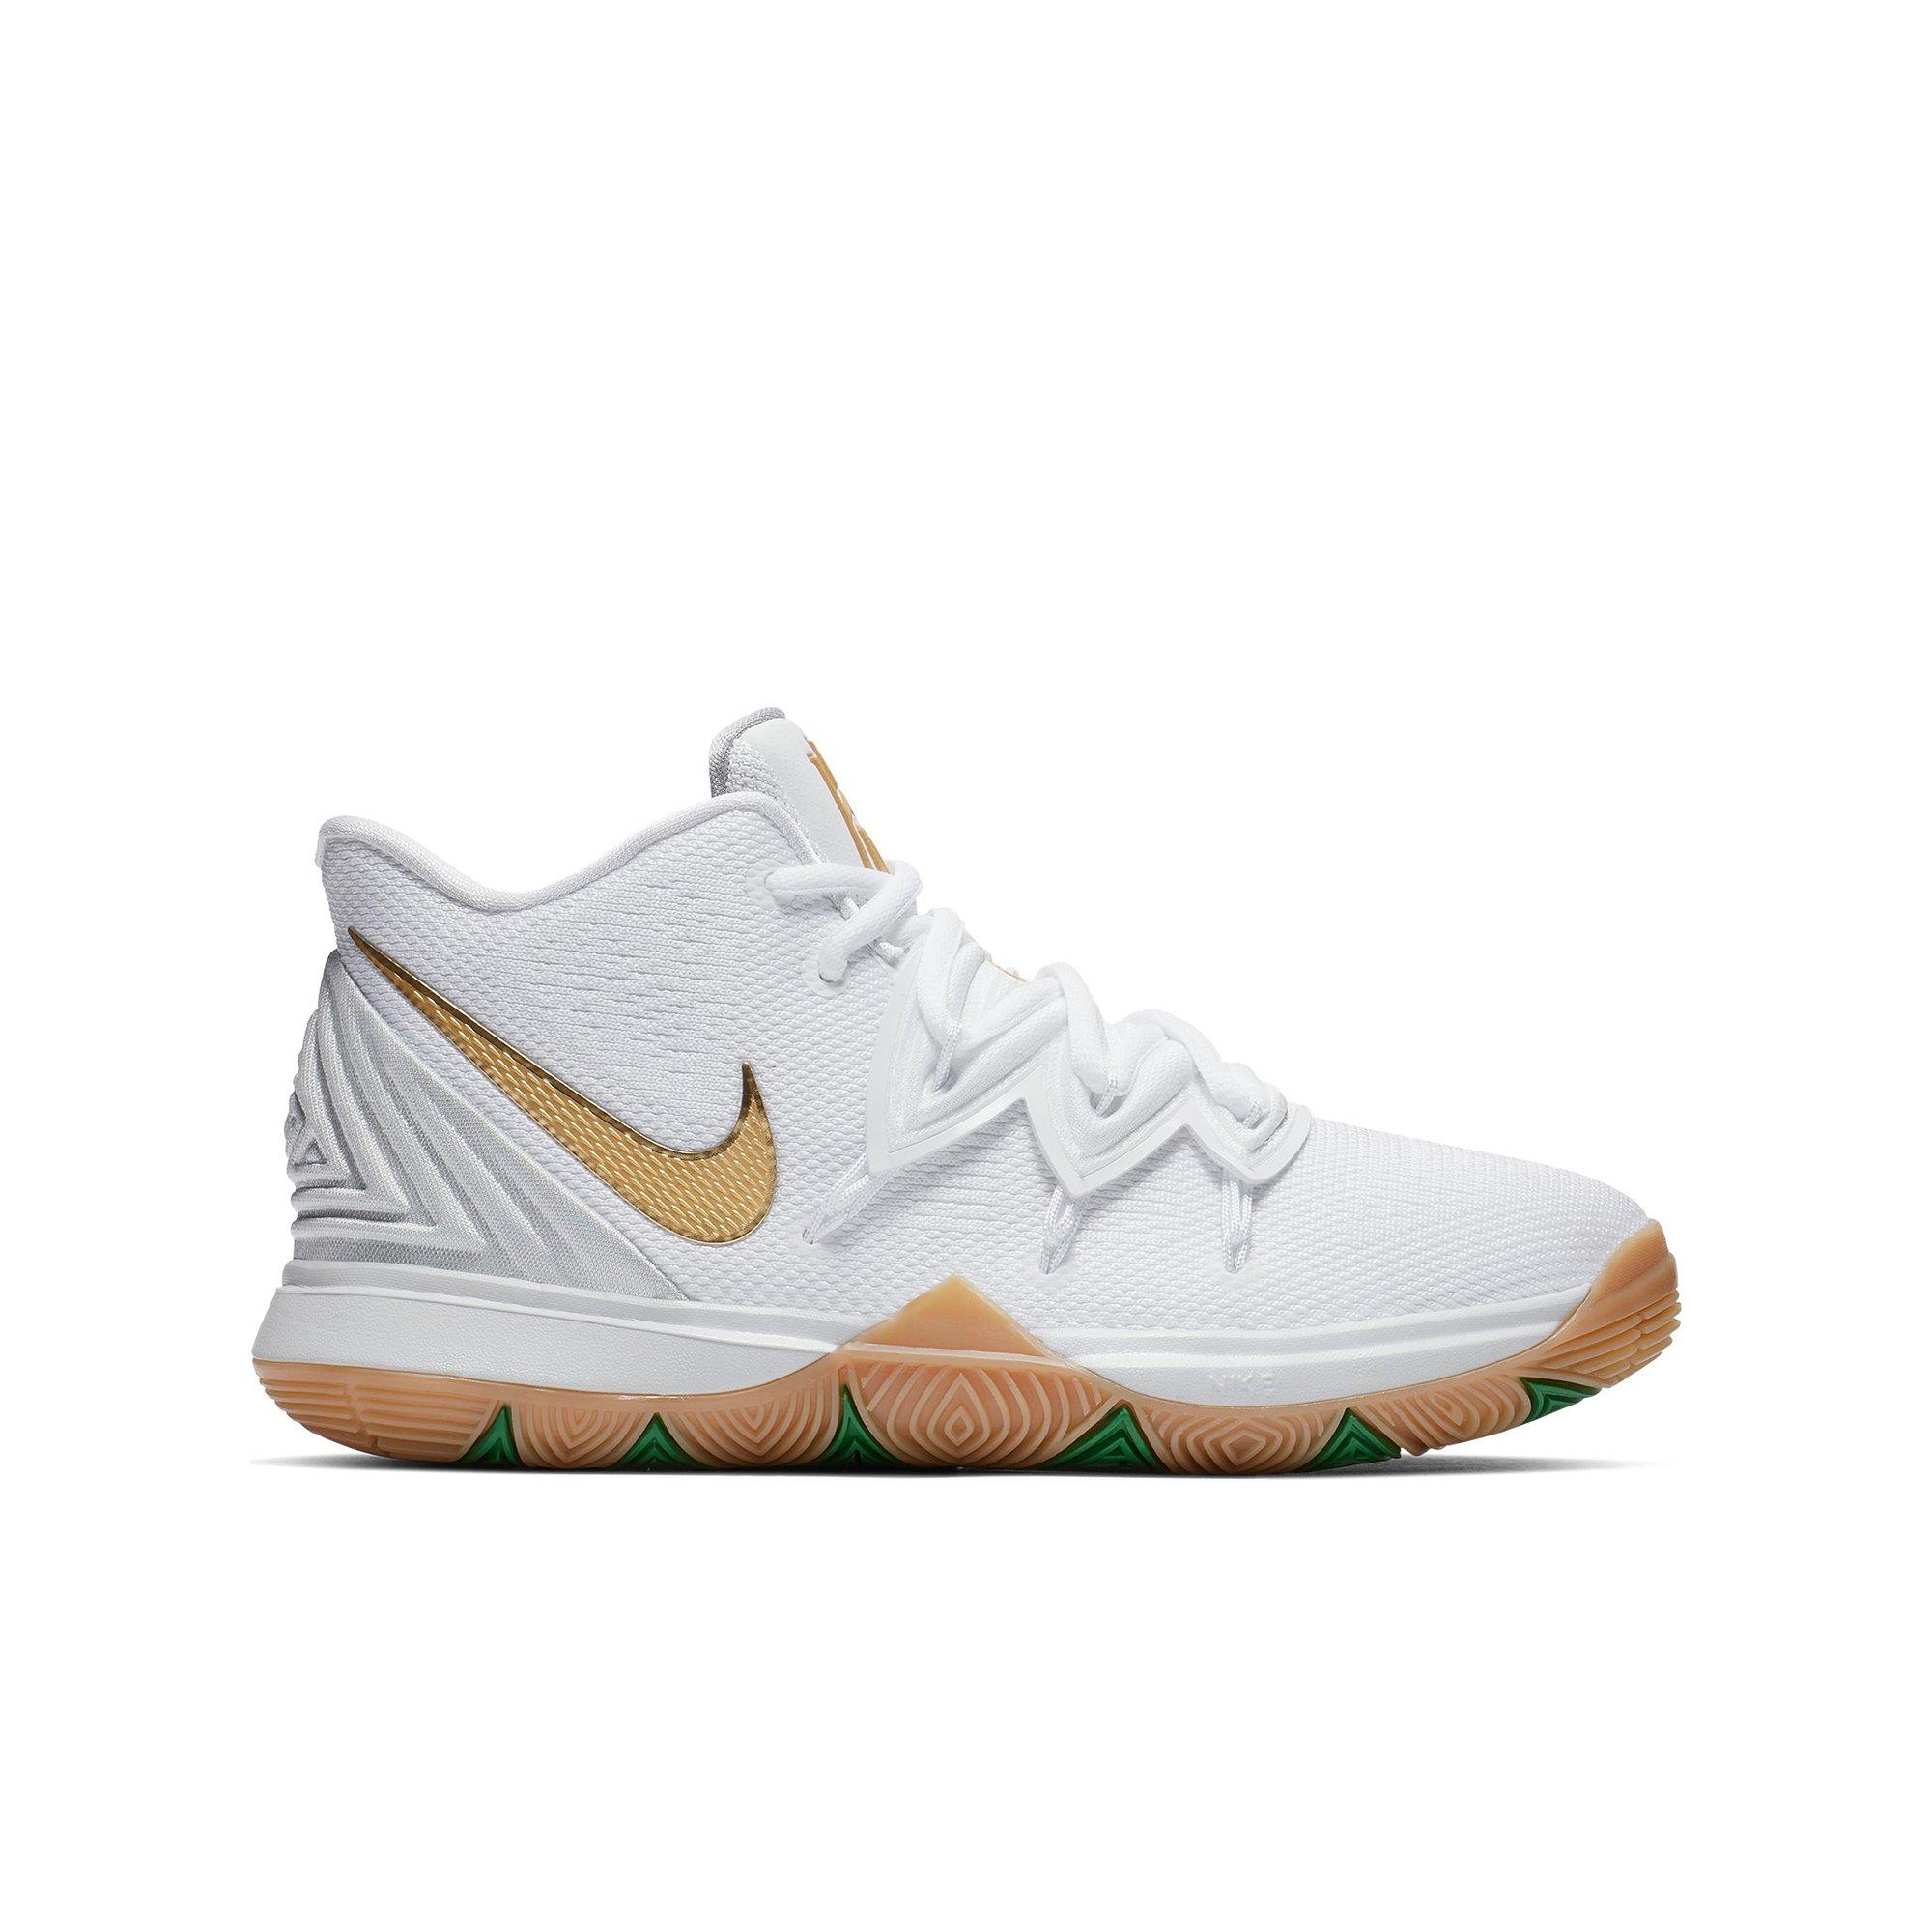 Sneaker Room X Nike Kyrie 5 White Multi Color New Style